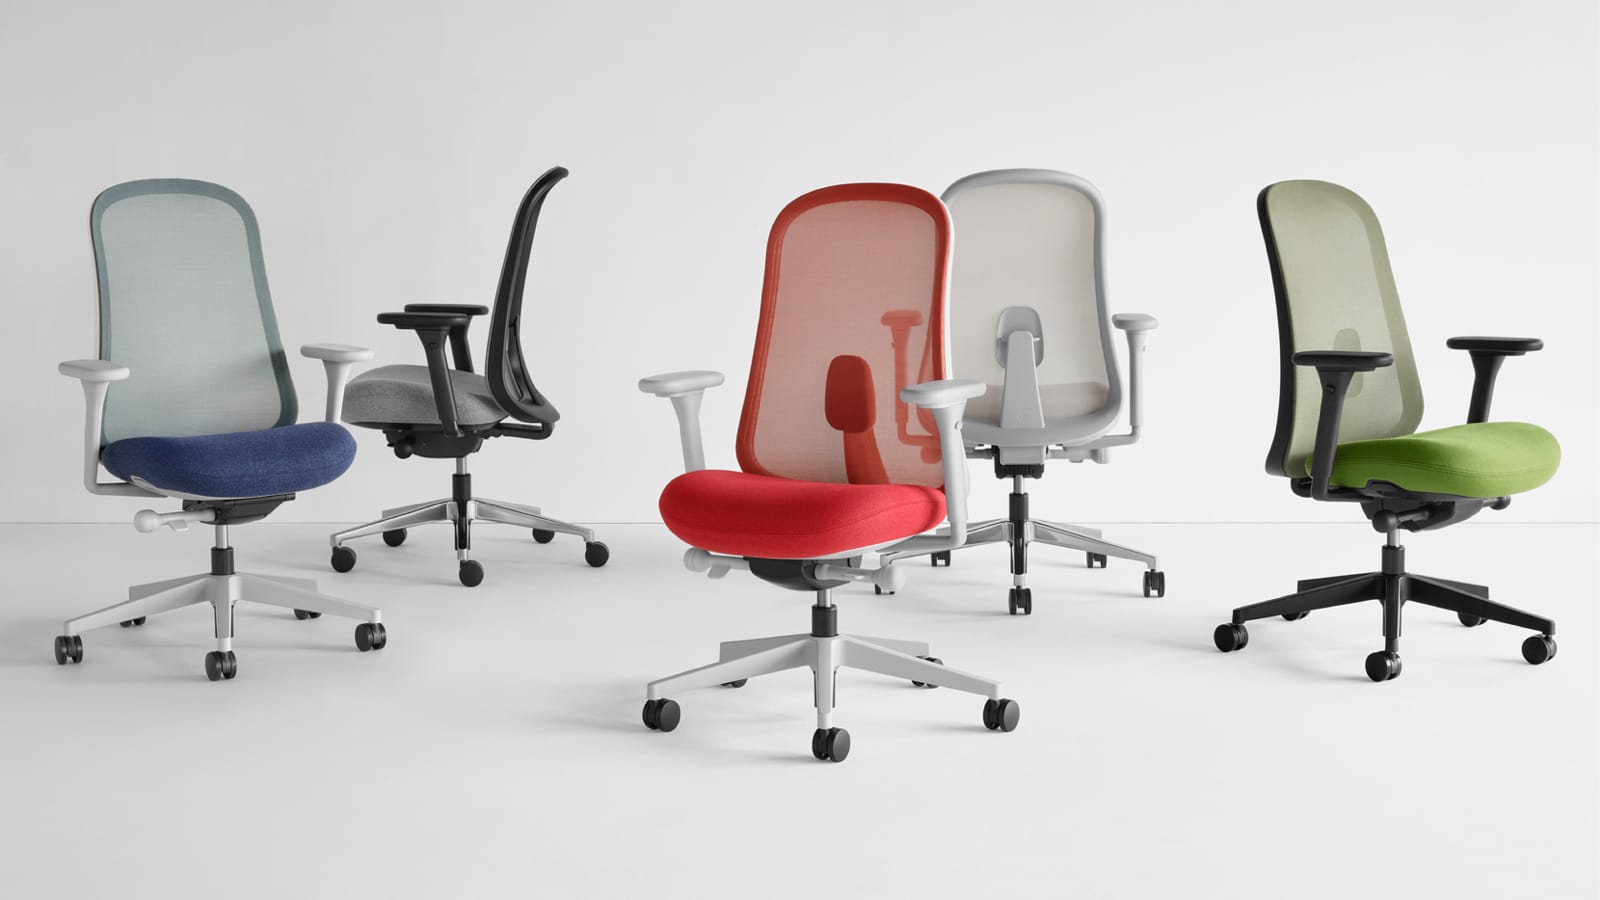 Five Lino Chairs in blue, black, gray, red and green viewed from various angles.